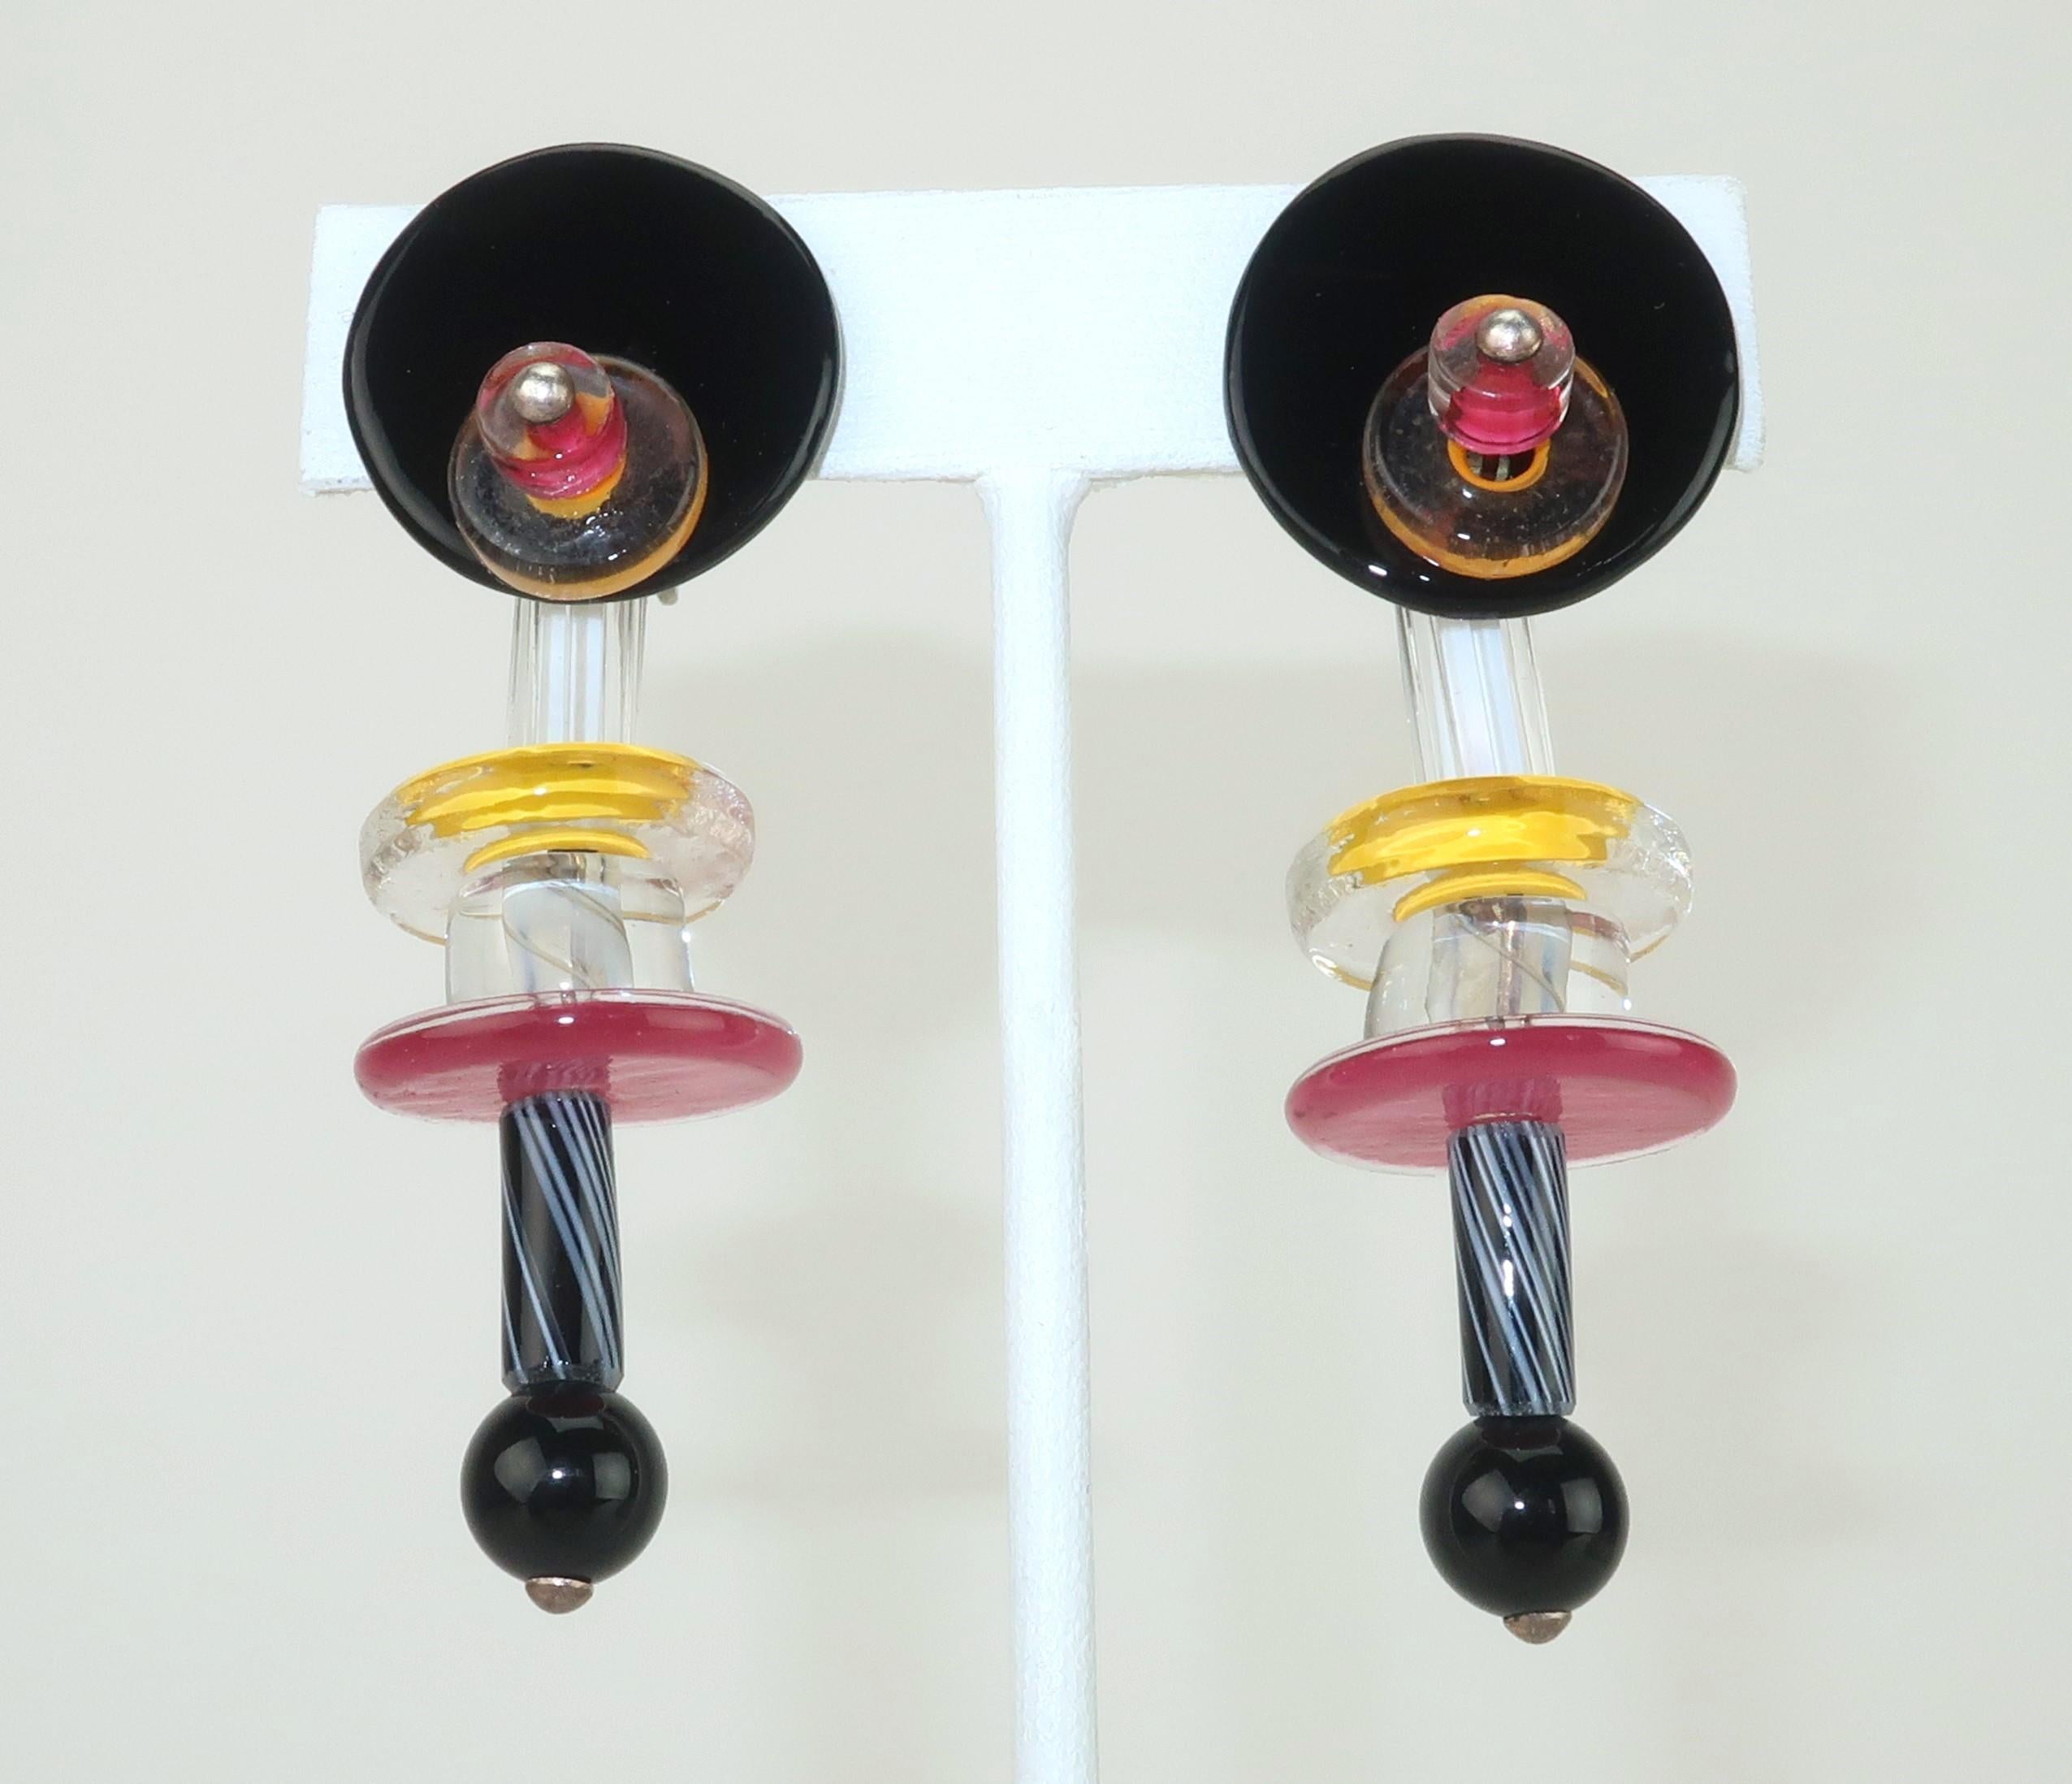 1960's modernist glass earrings with kinetic movement and clip on hardware.  Though these earrings are a couple of decades older than the Italian Memphis Milano style, the look is totally reminiscent of postmodern design with a combination of